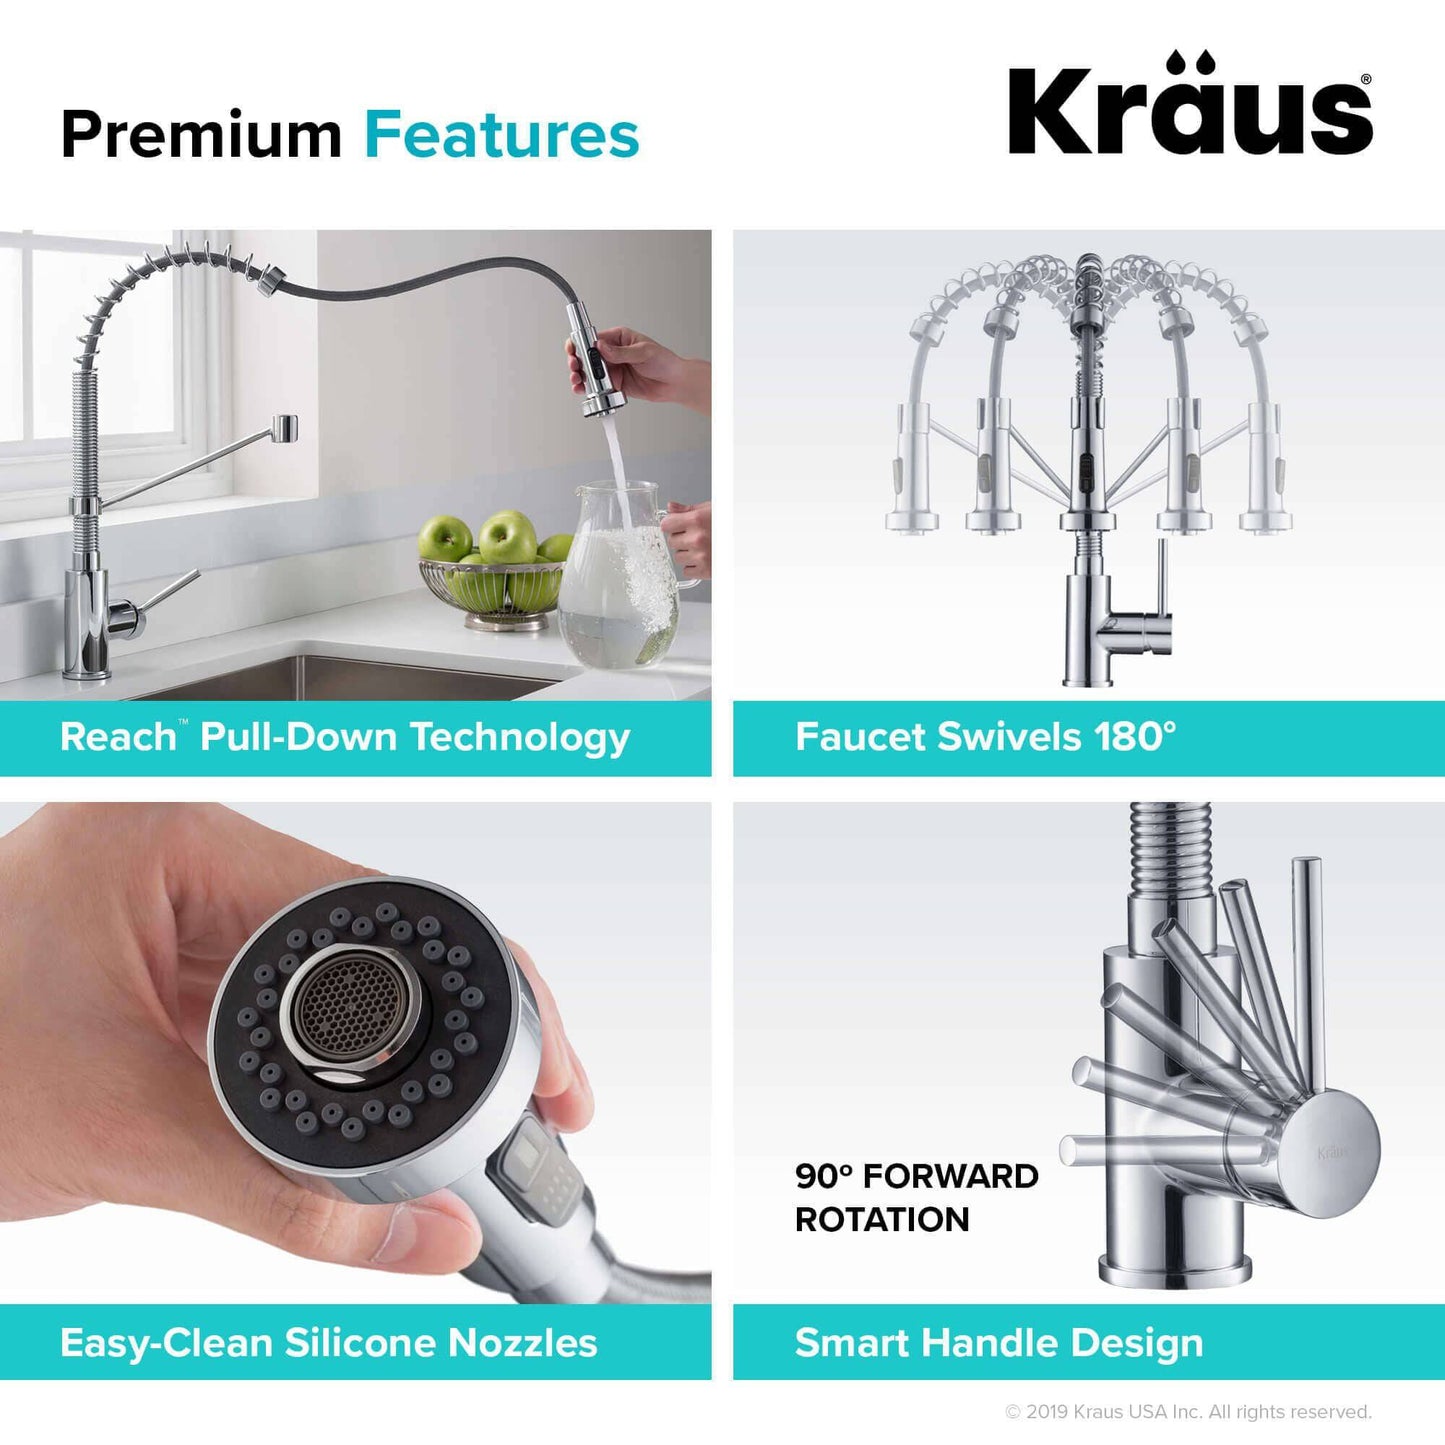 Kraus Bolden 18" Commercial Style Pull-Down Kitchen Faucet in Chrome